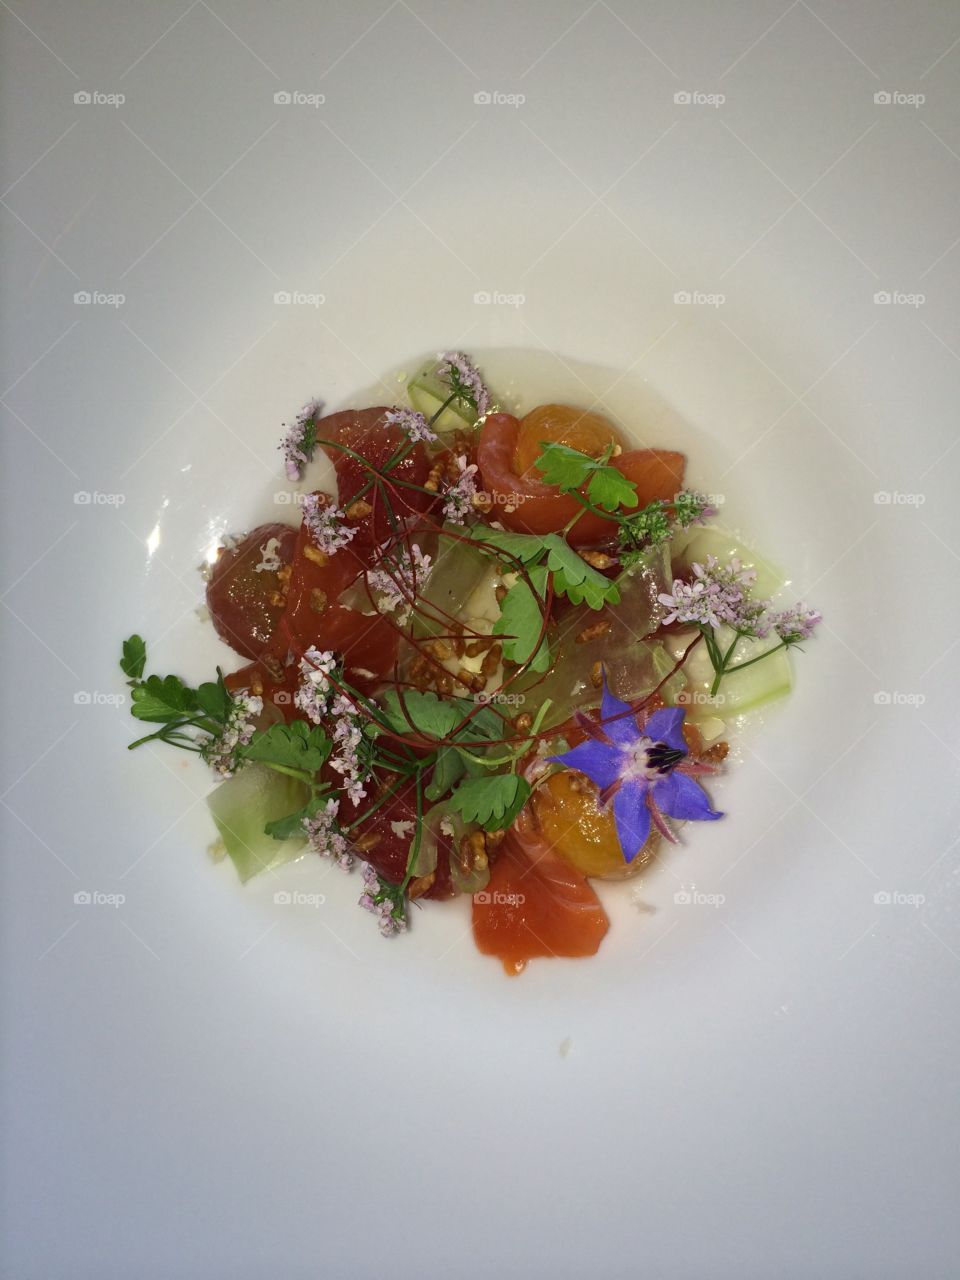 Organic tomato salad, garnished with edible flowers, leafy greens, in shallow white bowl 